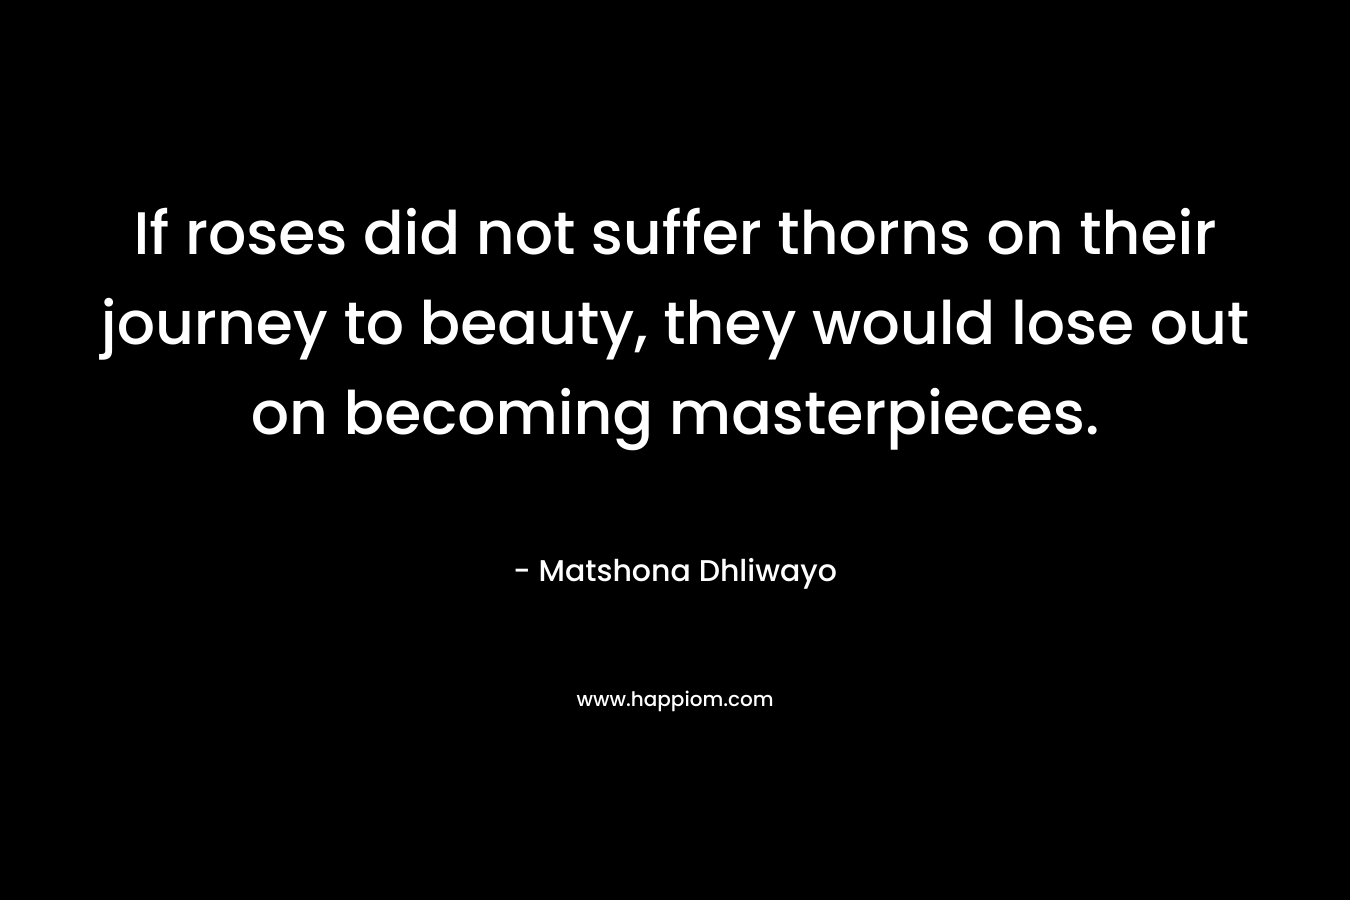 If roses did not suffer thorns on their journey to beauty, they would lose out on becoming masterpieces.